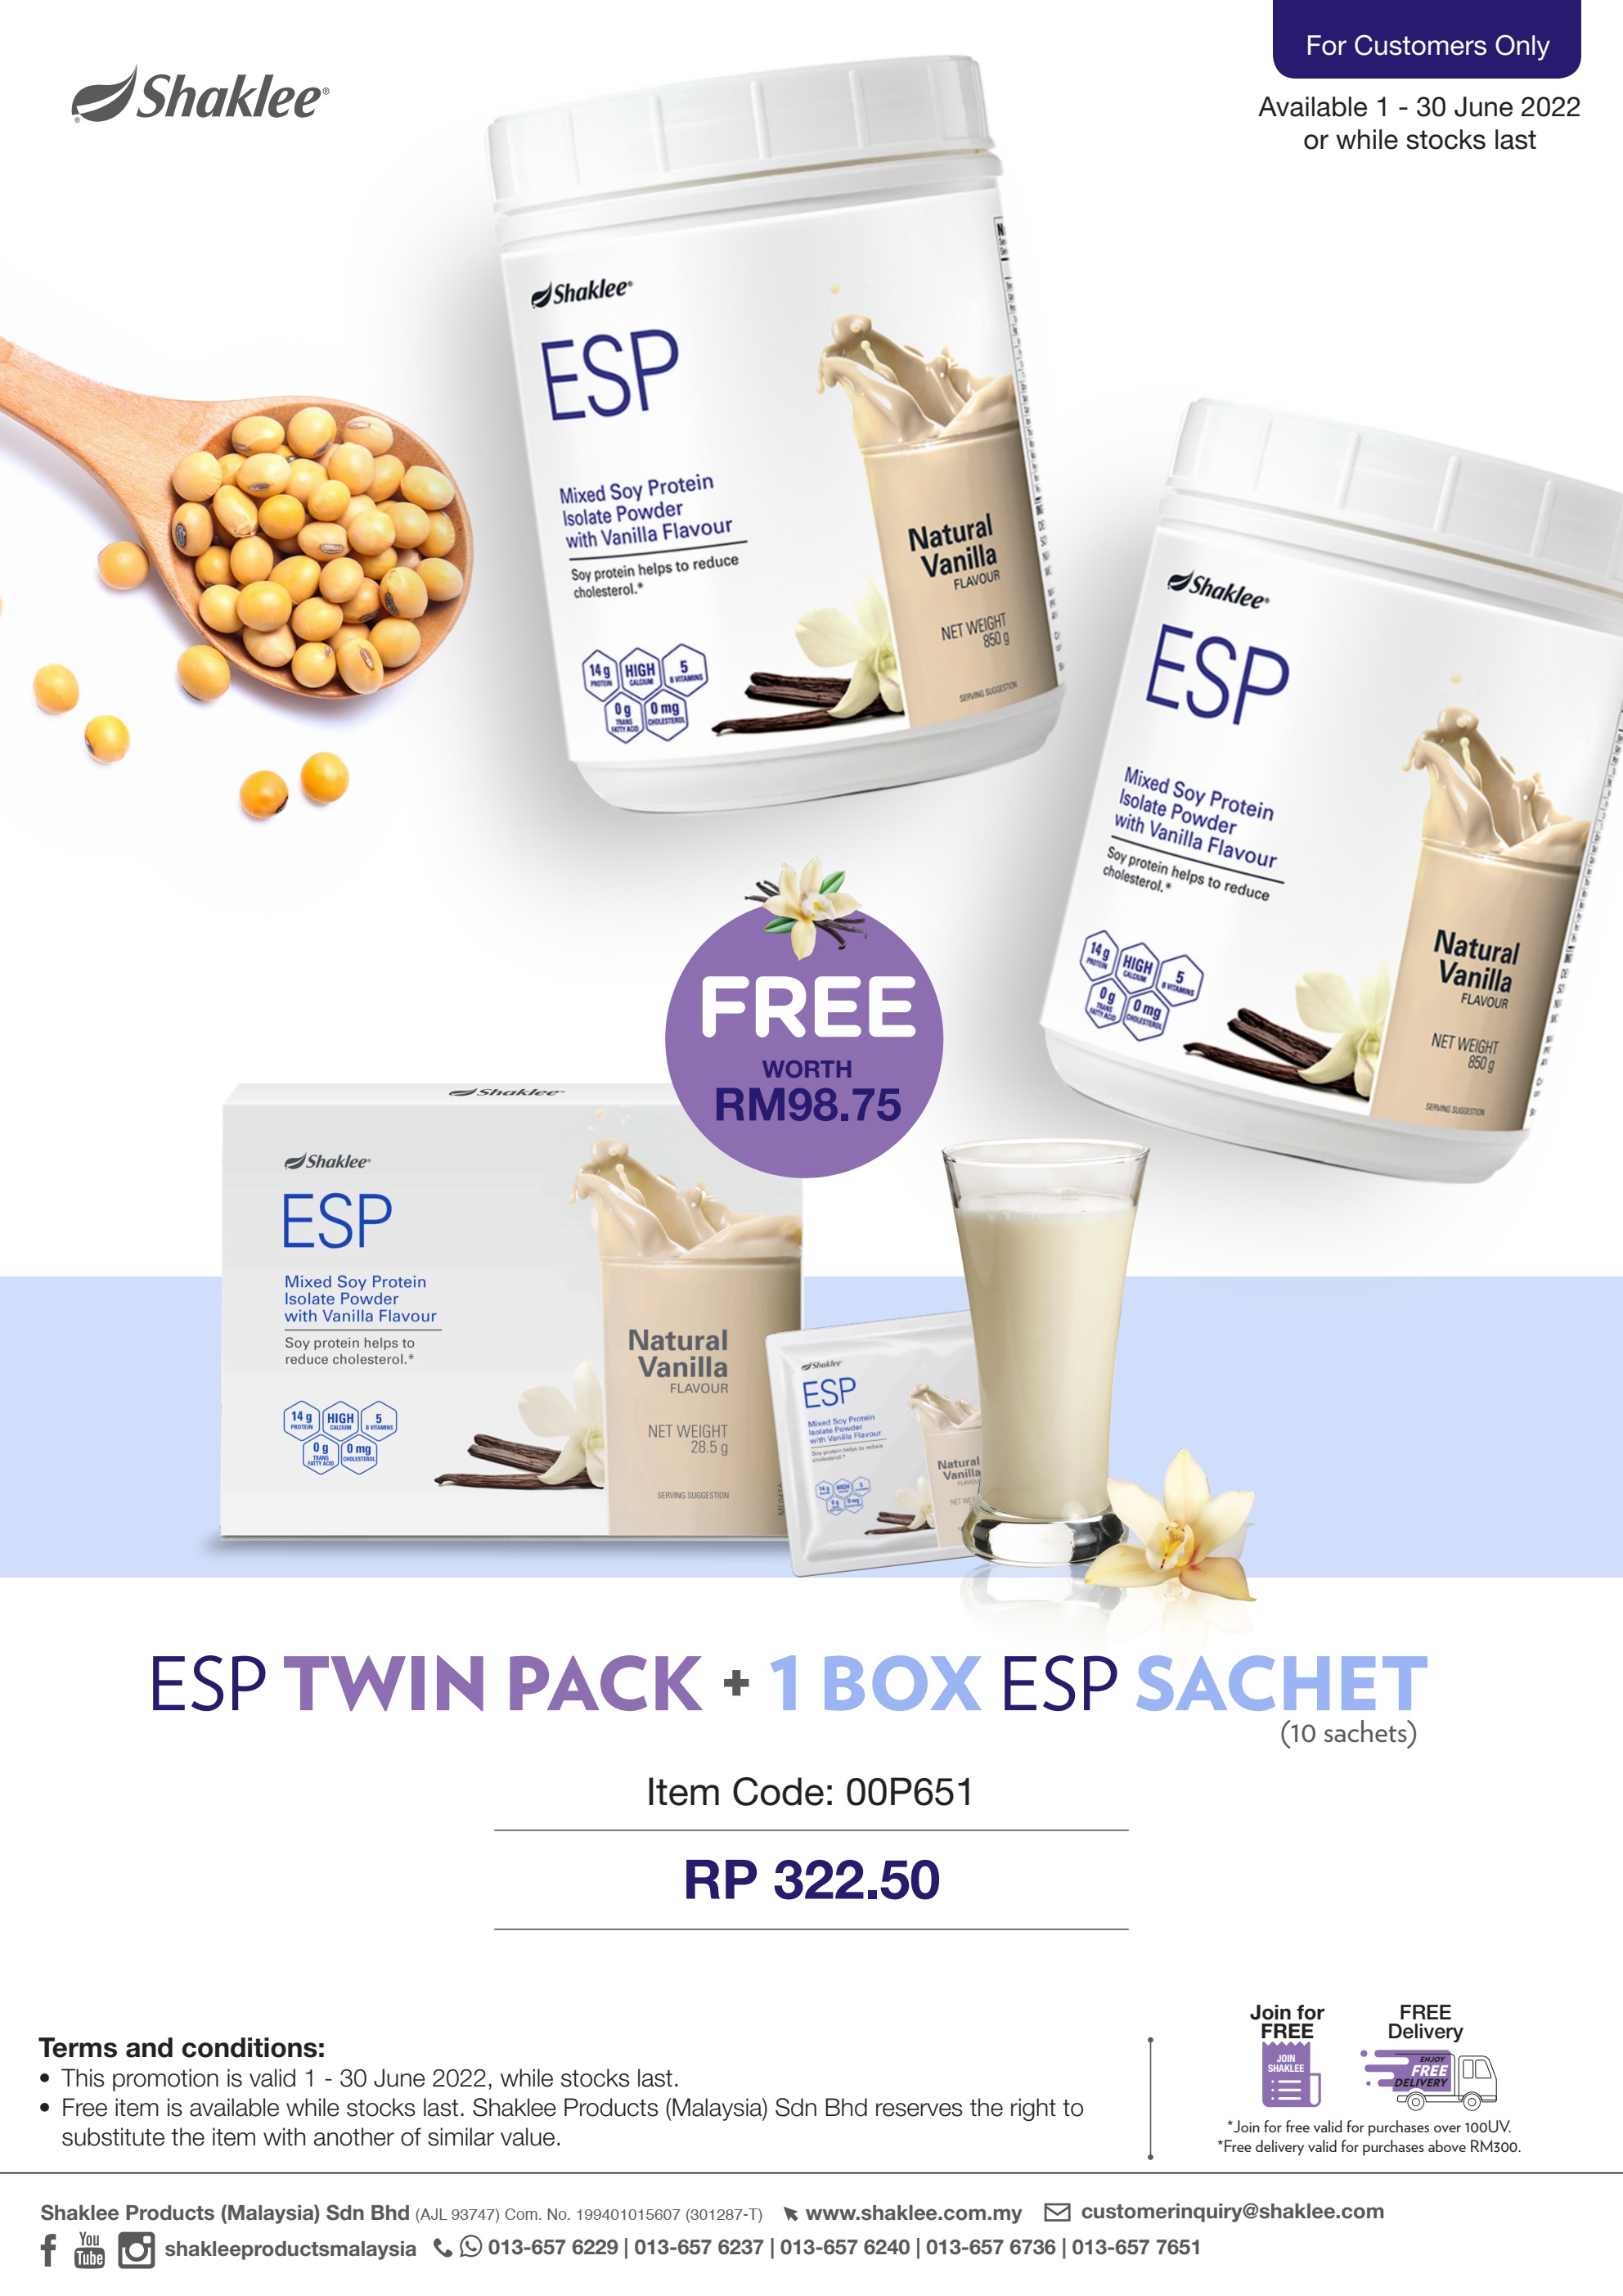 ESP Twin Pack Promotion 2022